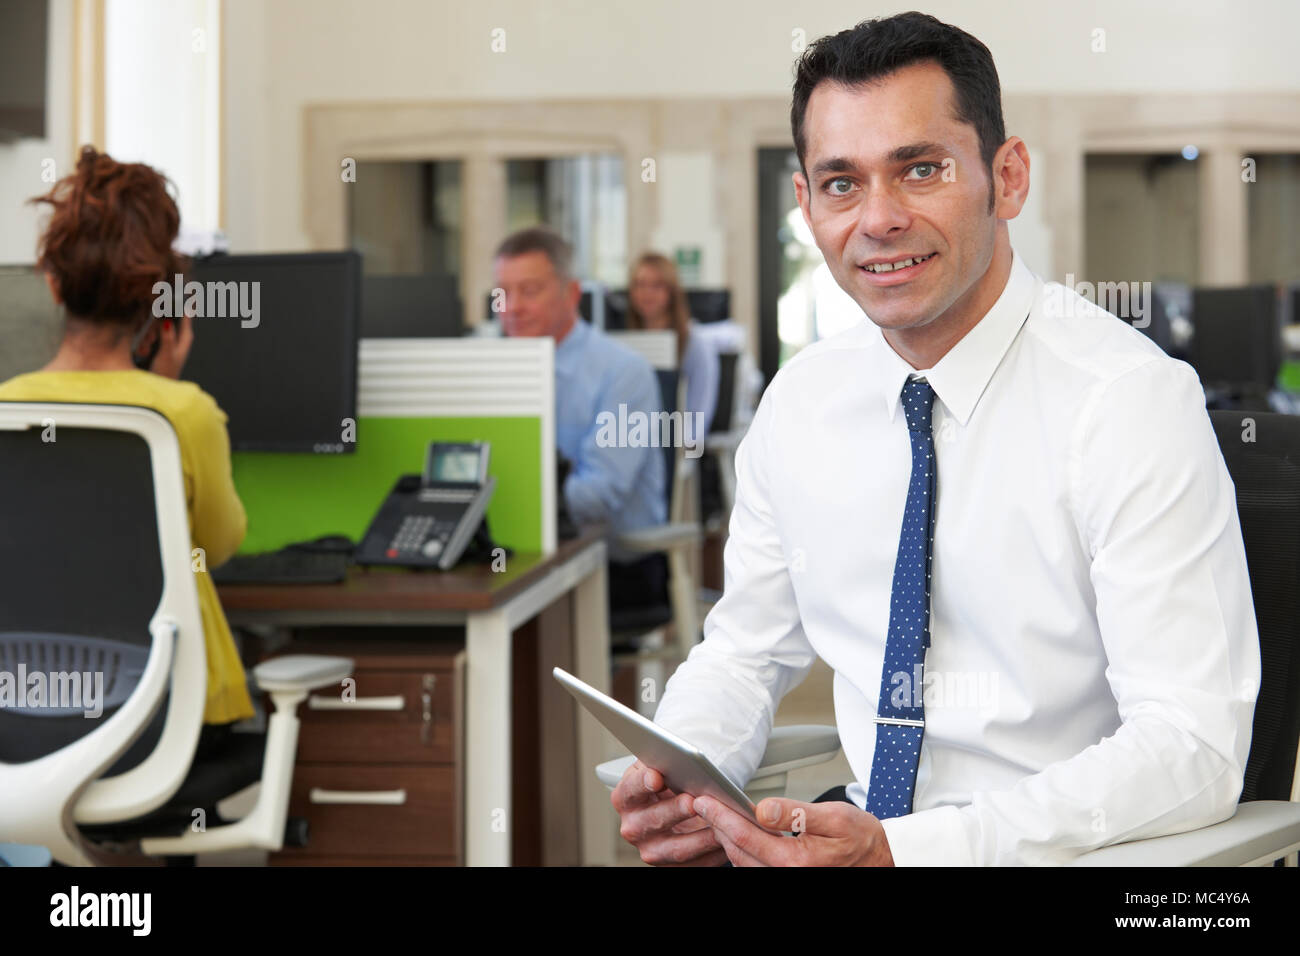 Portrait Of Businessman With Digital Tablet Sitting in Busy Modern Office Banque D'Images